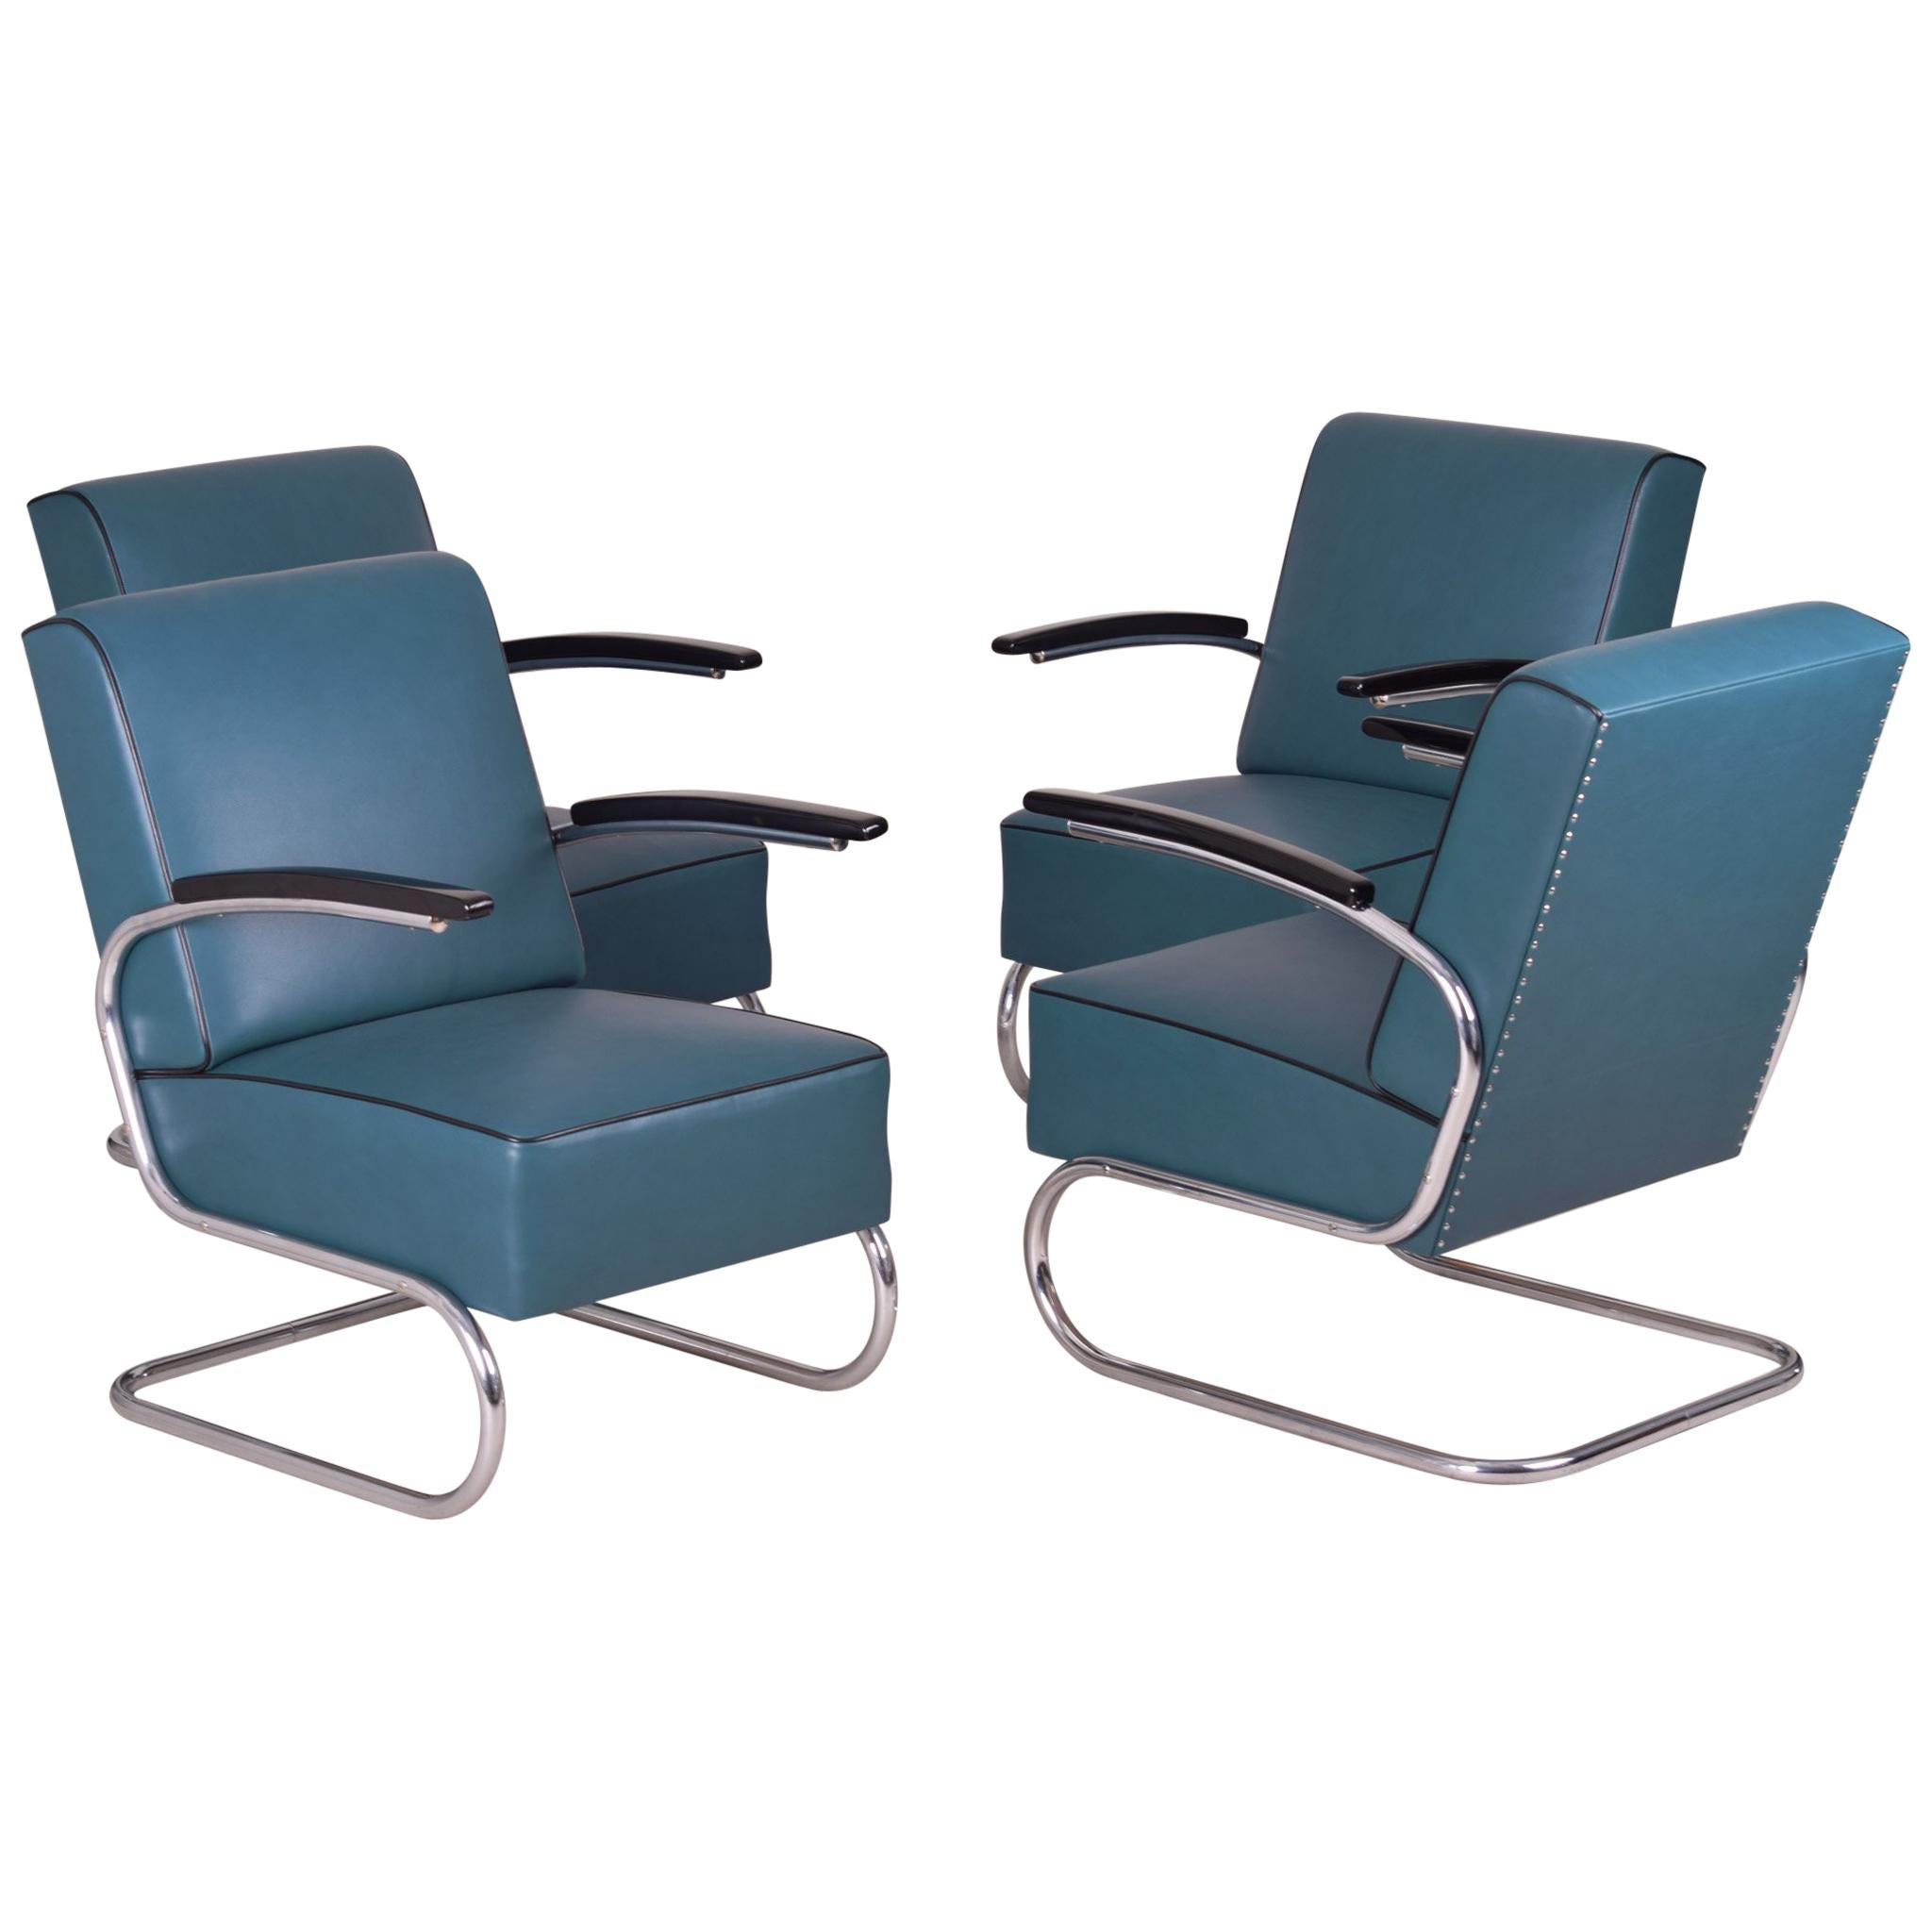 4 Tubular Steel Cantilever Armchairs in Art Deco, Chrome, New Blue Leather